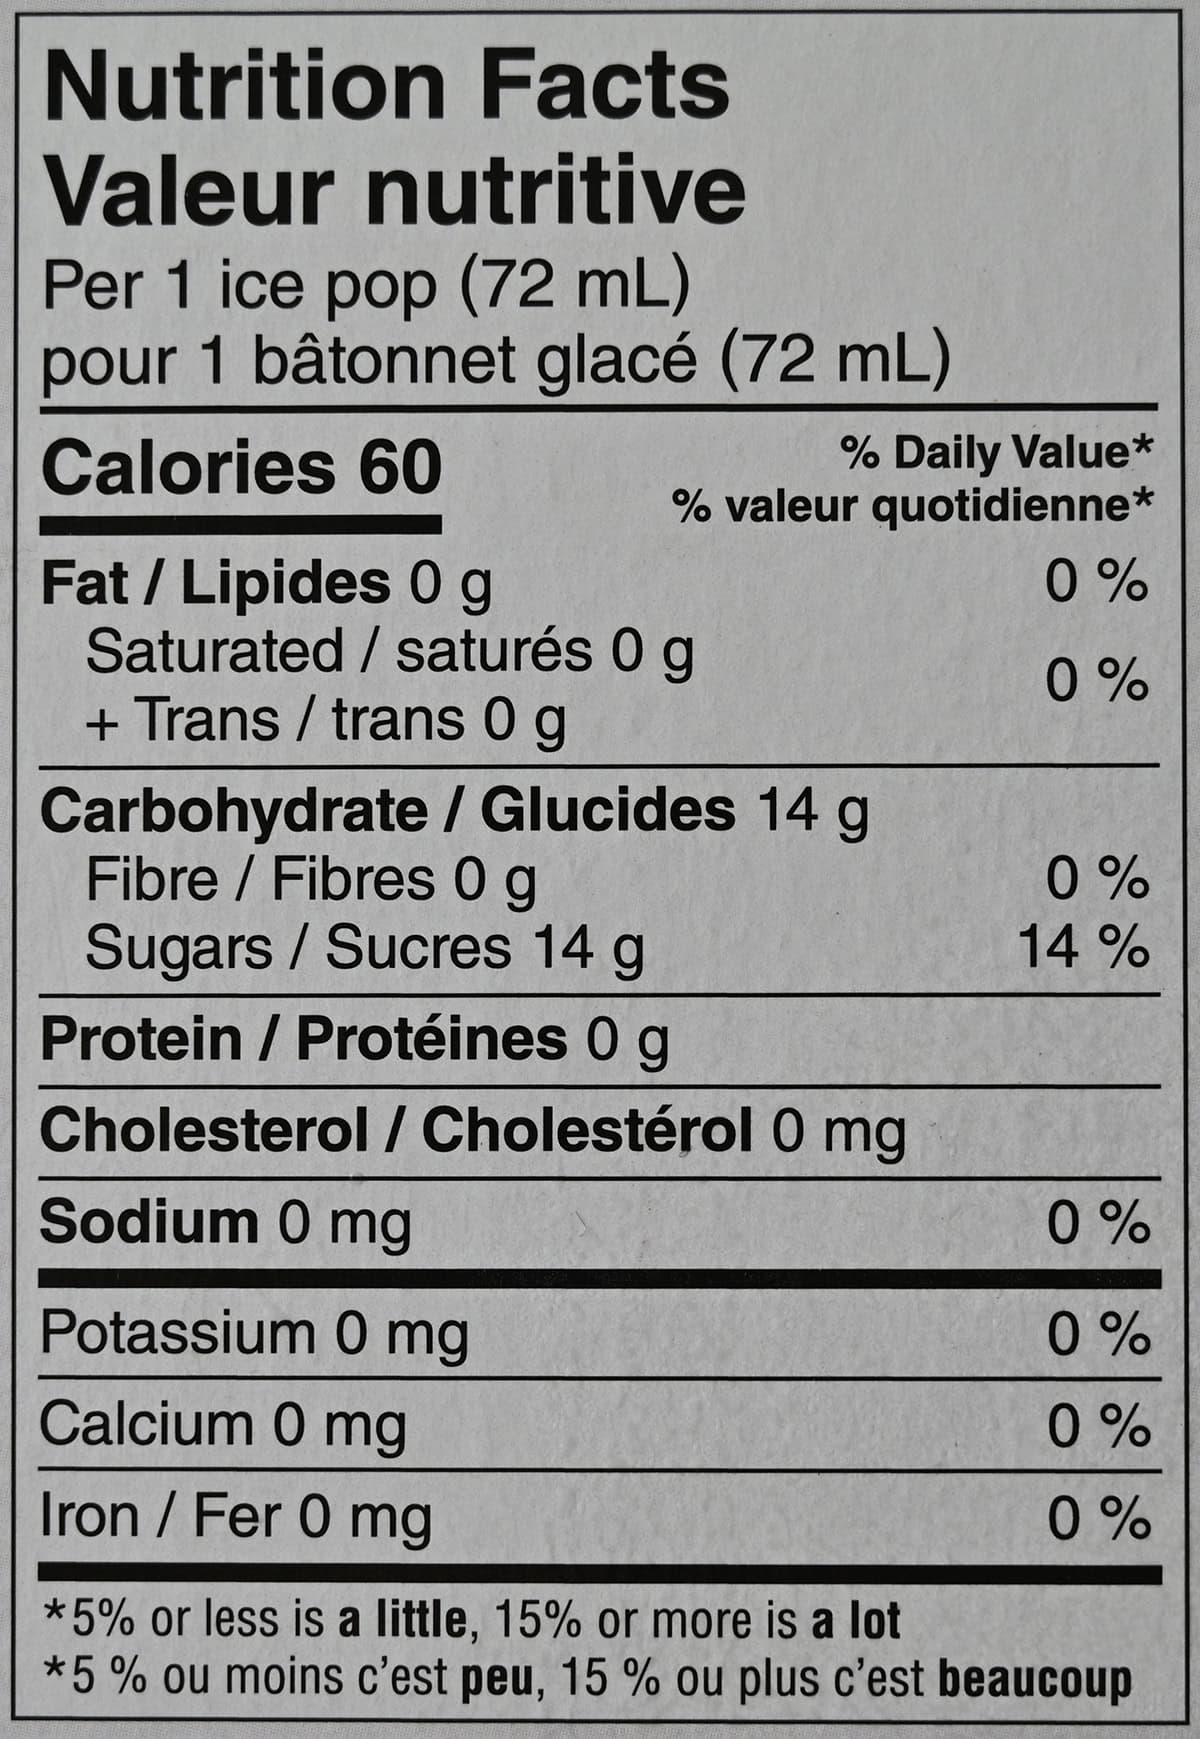 Image of the nutrition facts for the Jonny Pops from the back of the box.